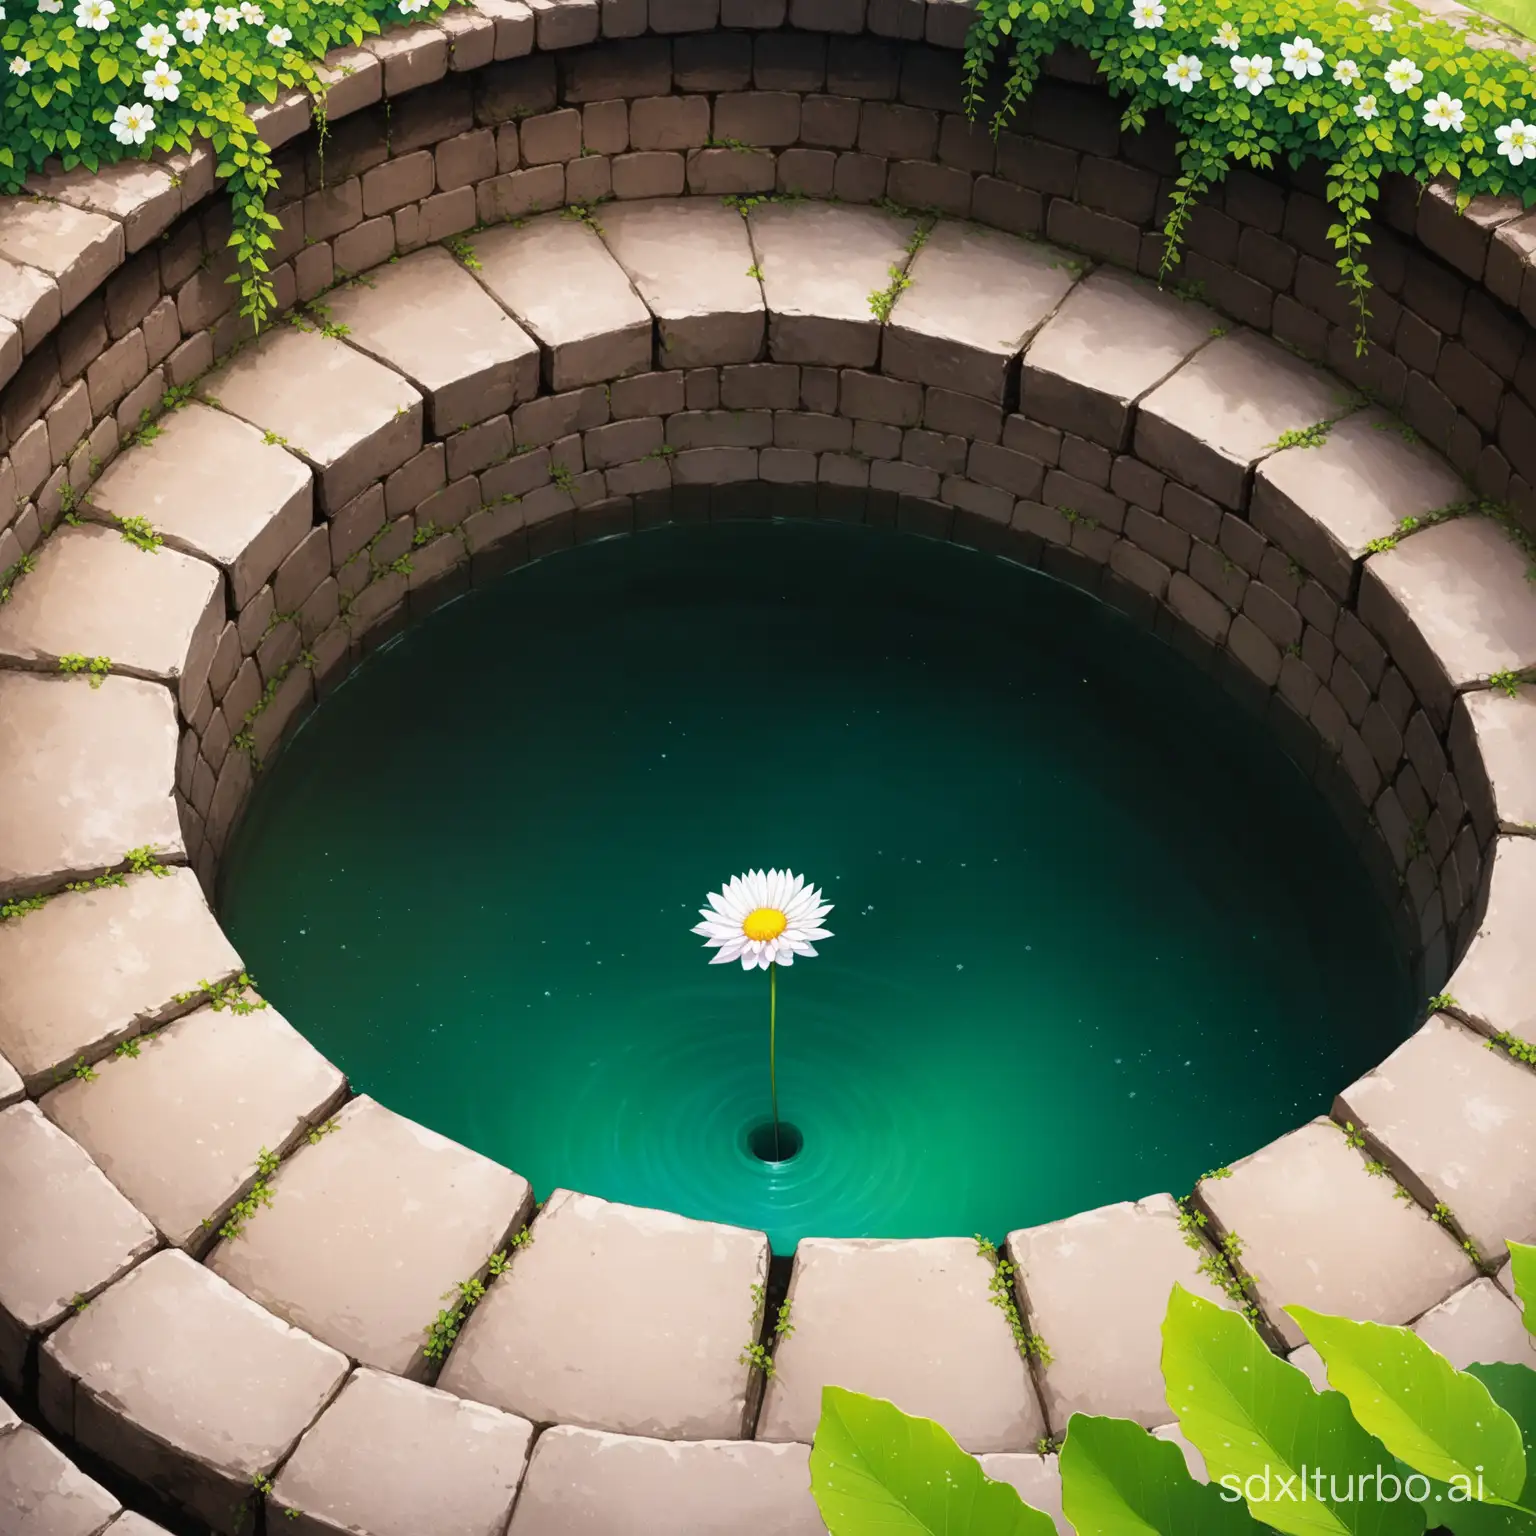 The Flower at the Bottom of the Well